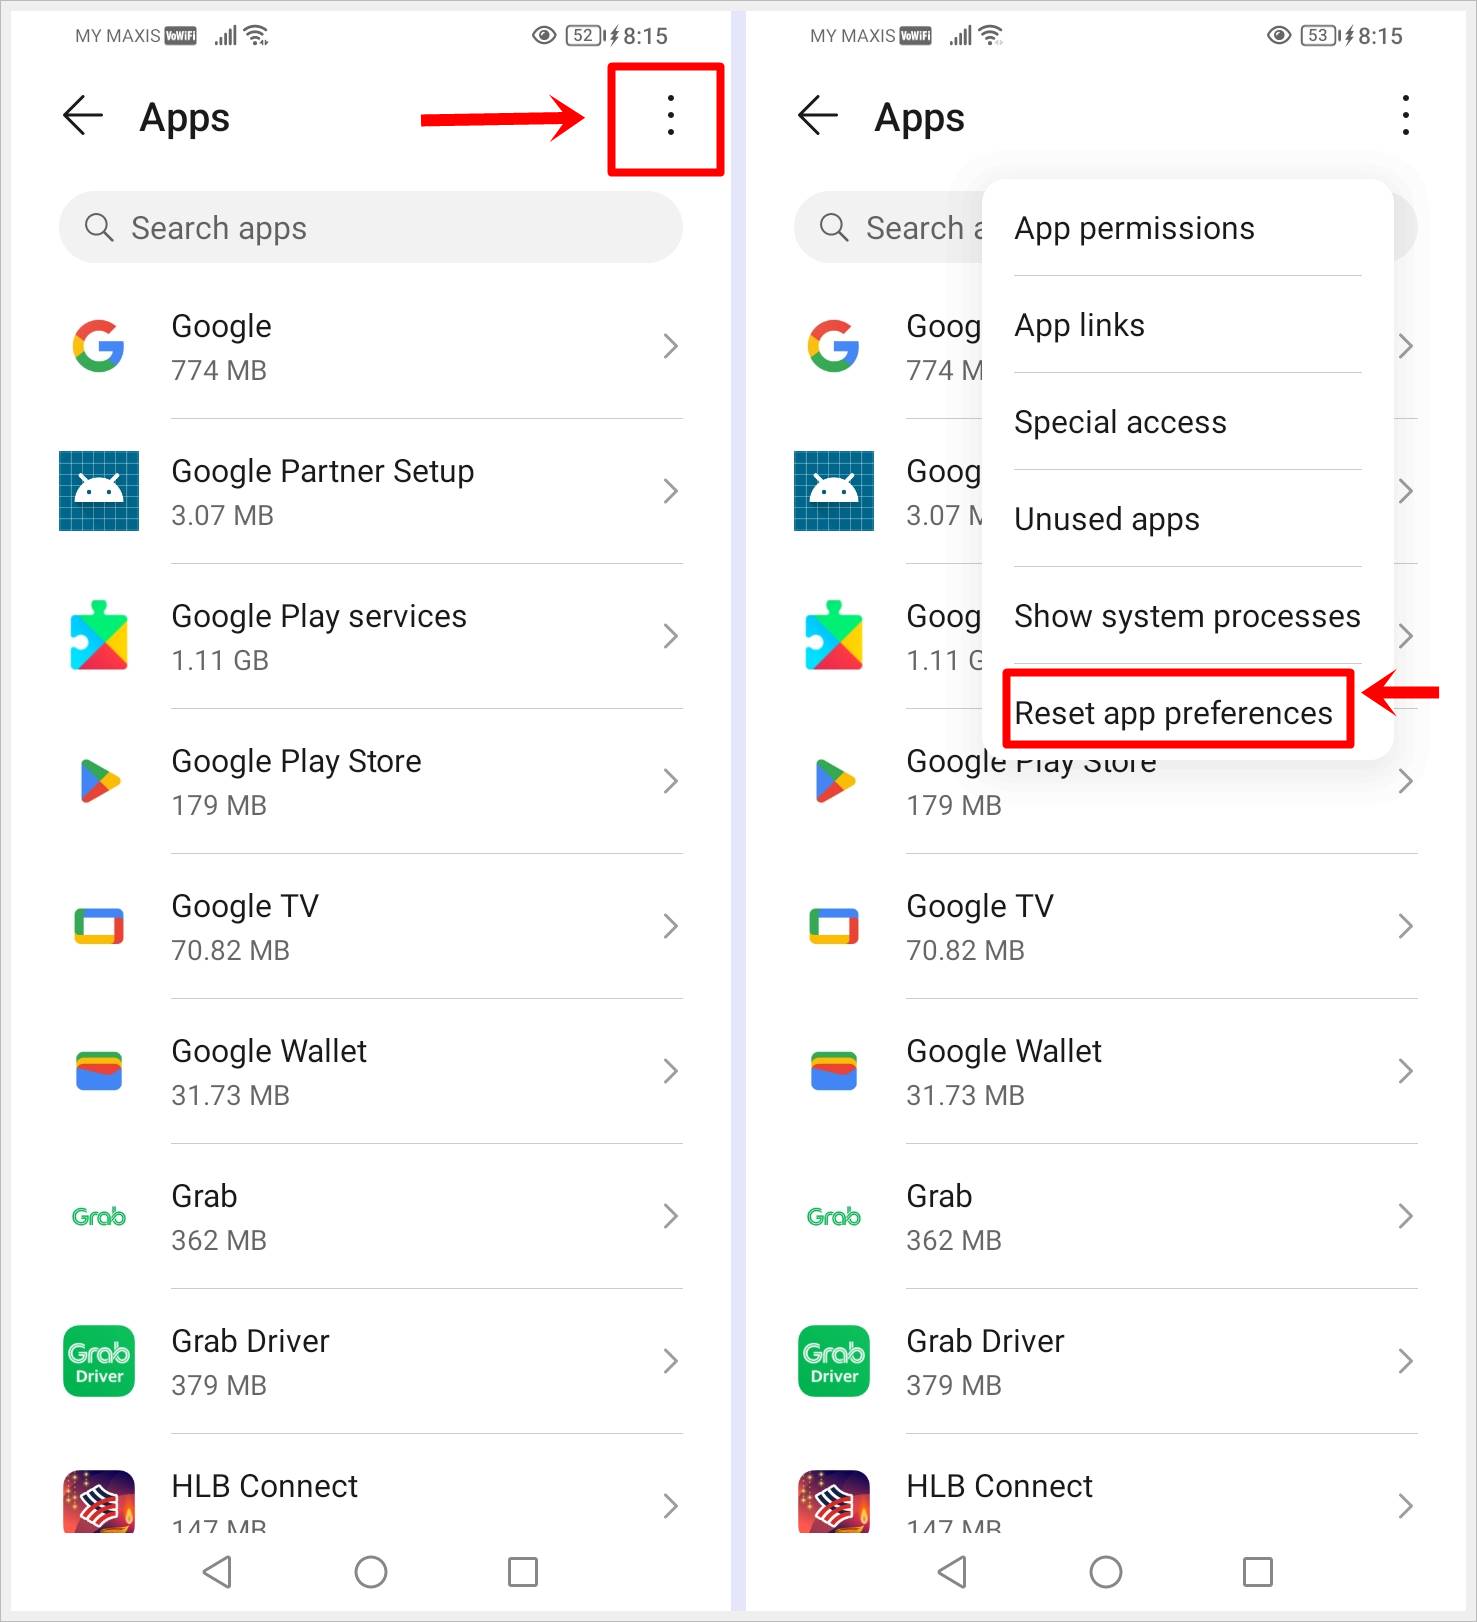 This image shows 2 screenshots of the "Apps" page on an Android phone, with one highlighting the 3 Vertical Dots menu, while the other highlighting the "Reset app preferences" option respectively. 